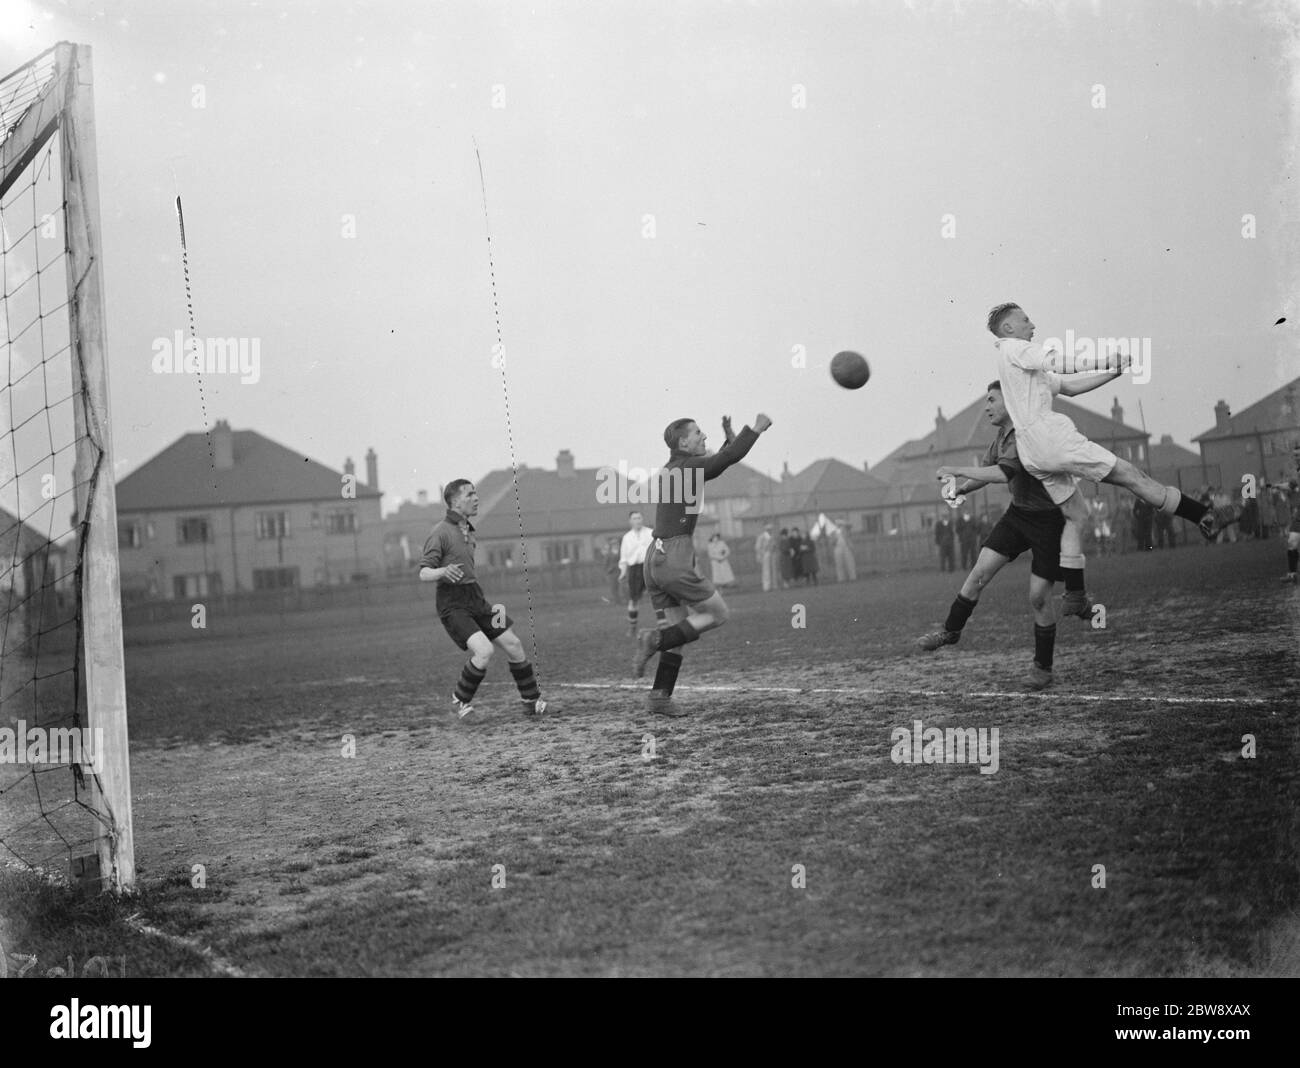 London football club versus Birmingham , methodist football . L Boulton of Birmingham comes out to collect the ball . 1939 Stock Photo